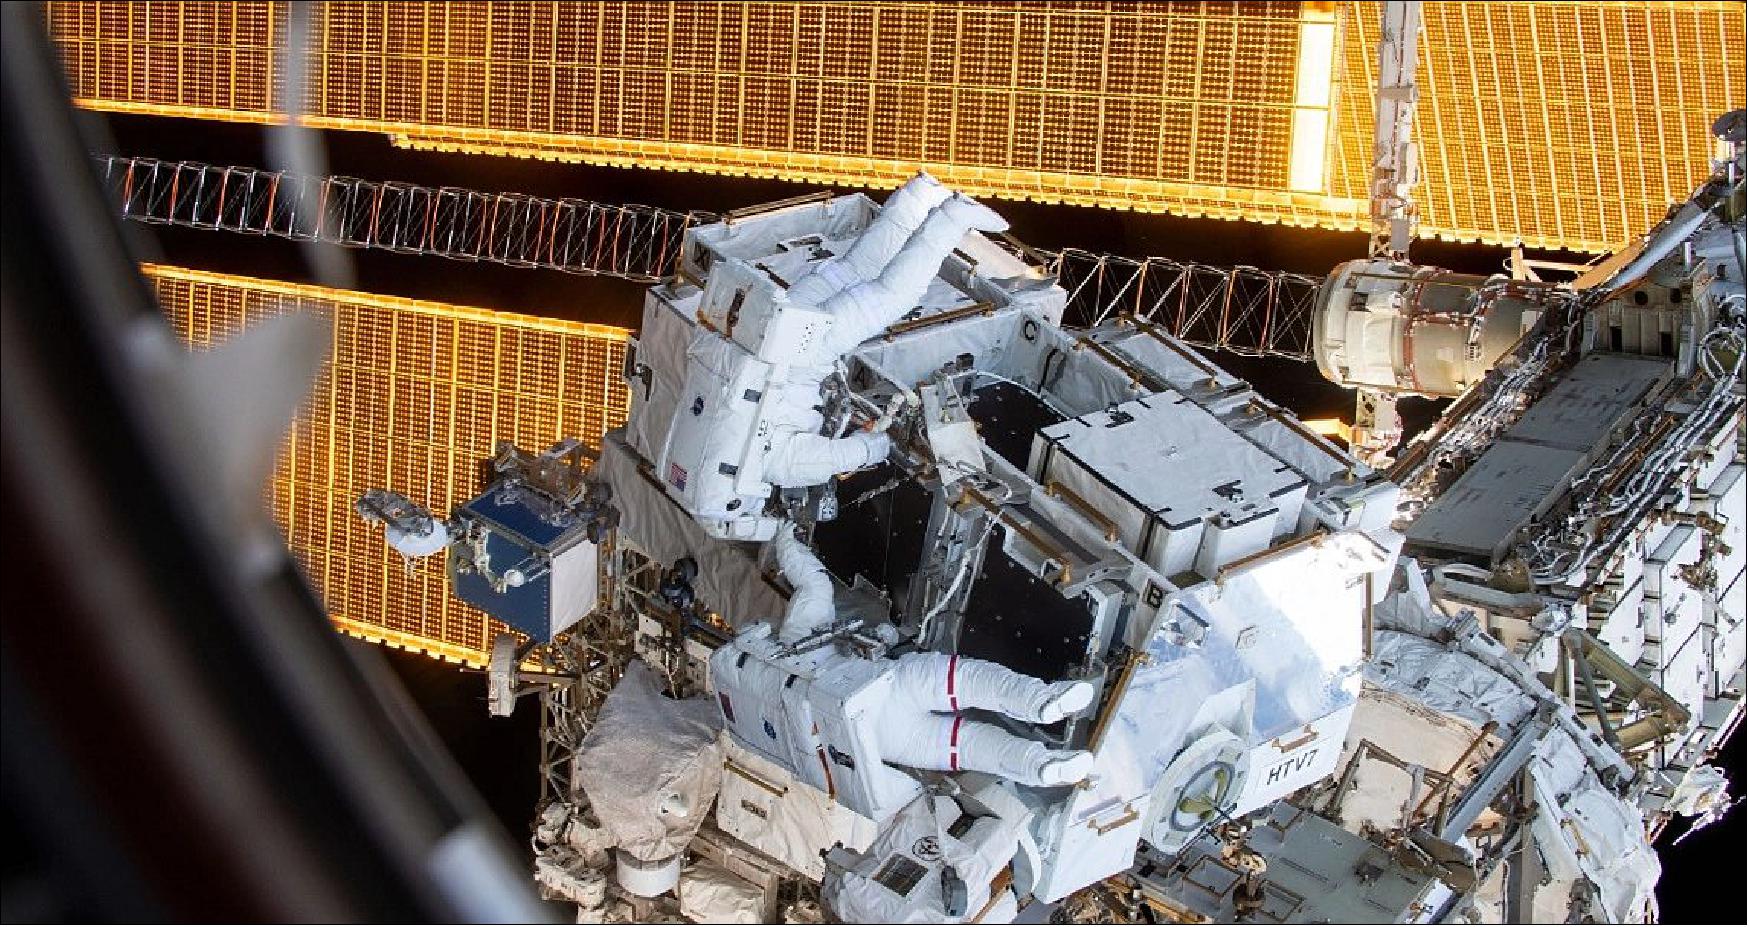 Figure 54: The spacewalk, designated US EVA-68, marked the 10th EVA for both astronauts, who have each accumulated over 50 hours of spacewalking time each during their respective careers (image credit: NASA TV)